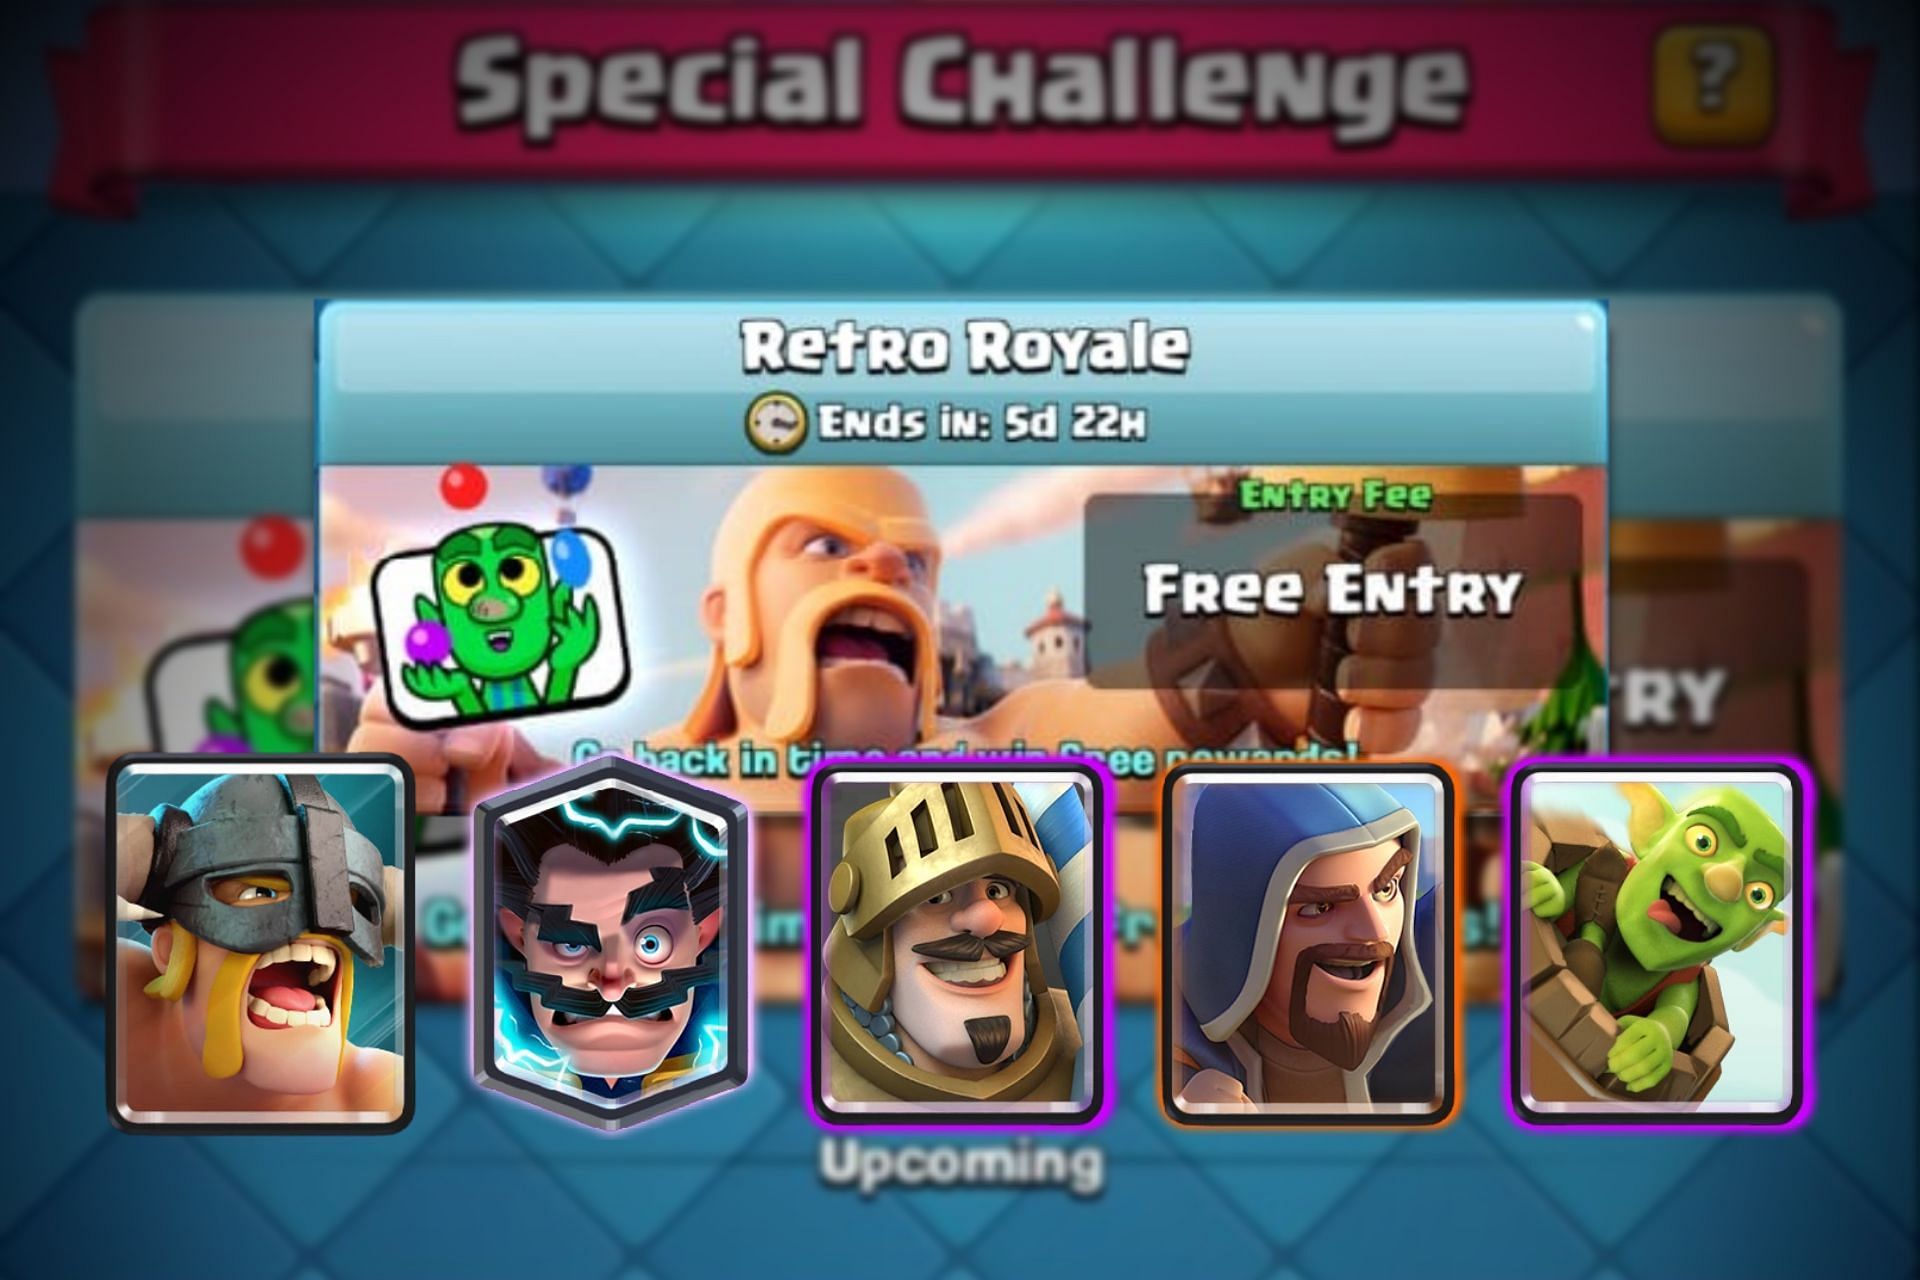 5 best cards for the Retro Royale challenge in Clash Royale (Image via sportskeeda)